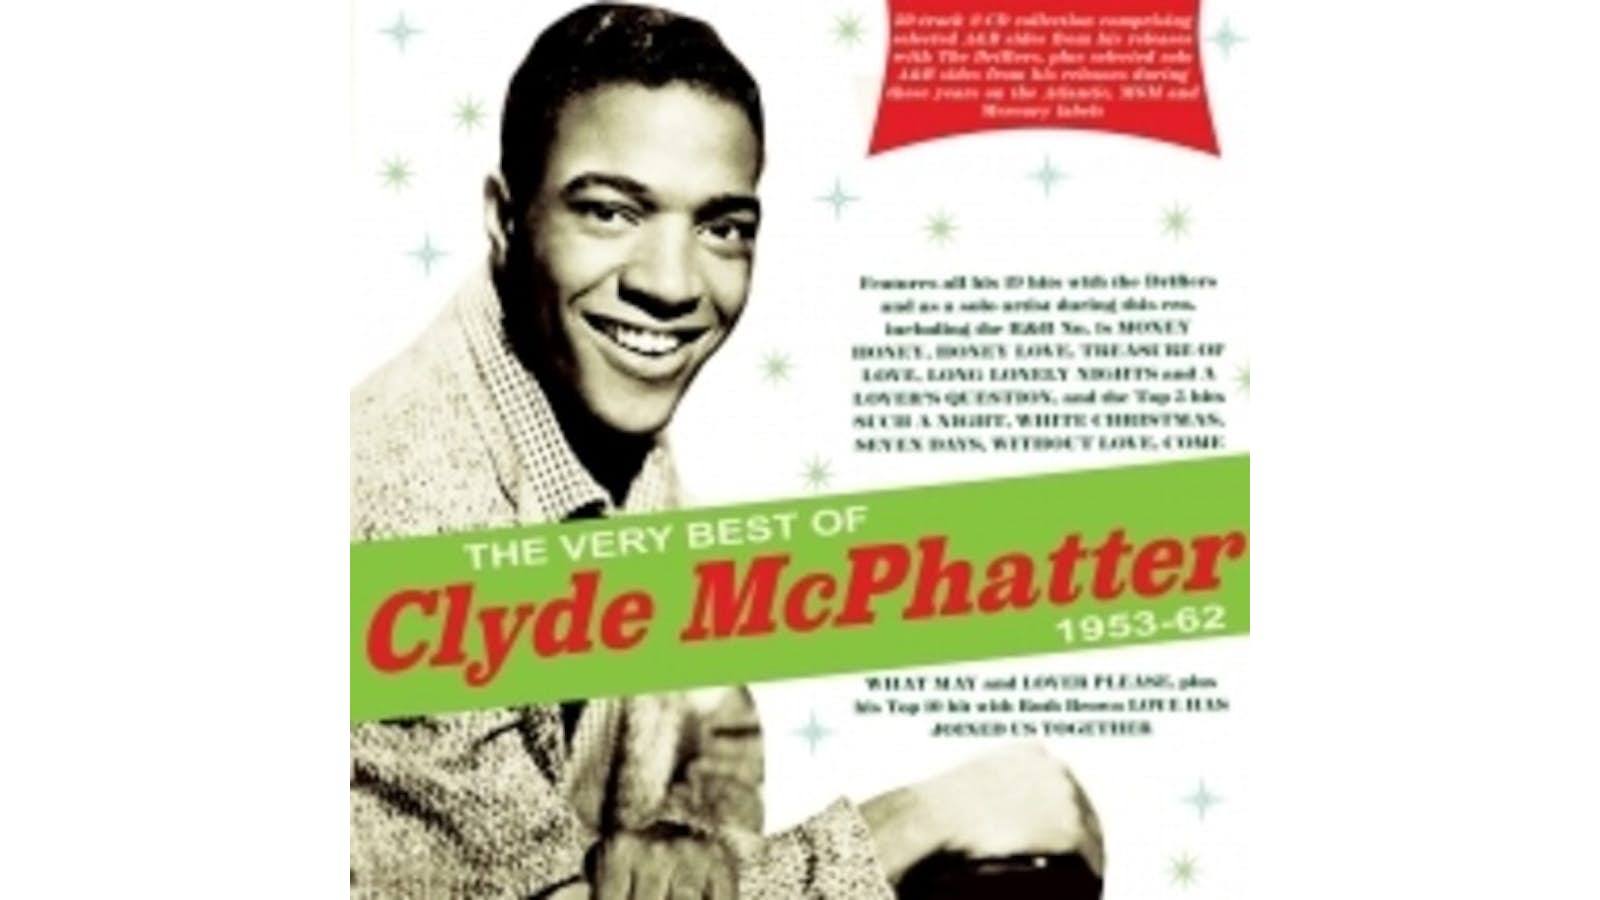 Clyde McPhatter - More Of His Greatest Recordings: 3 Complete